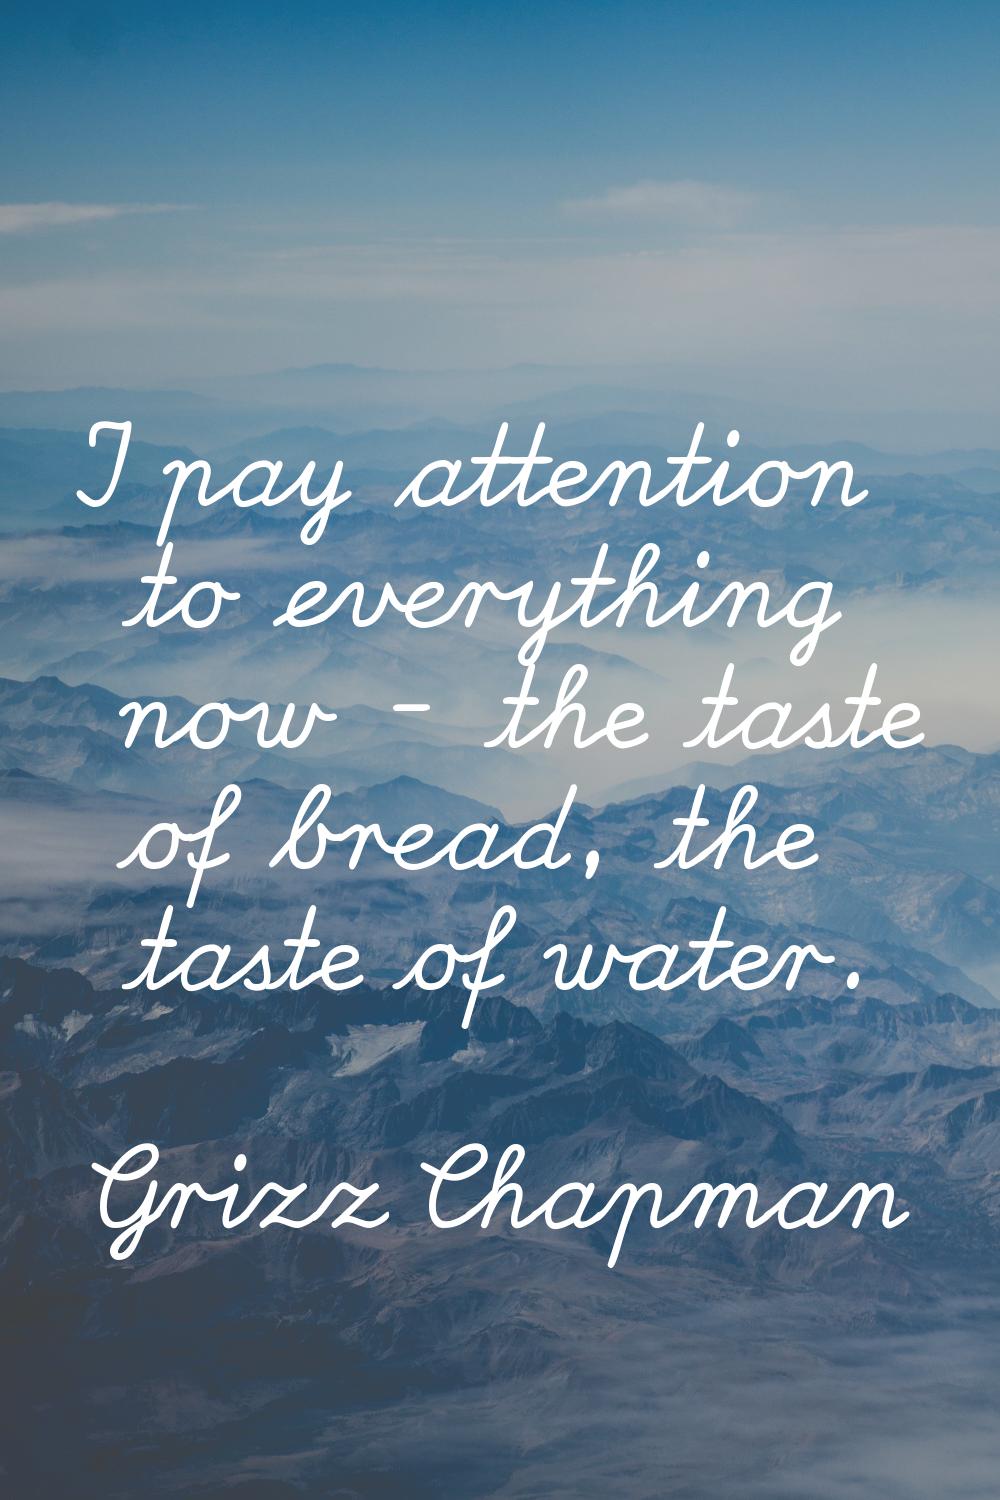 I pay attention to everything now - the taste of bread, the taste of water.